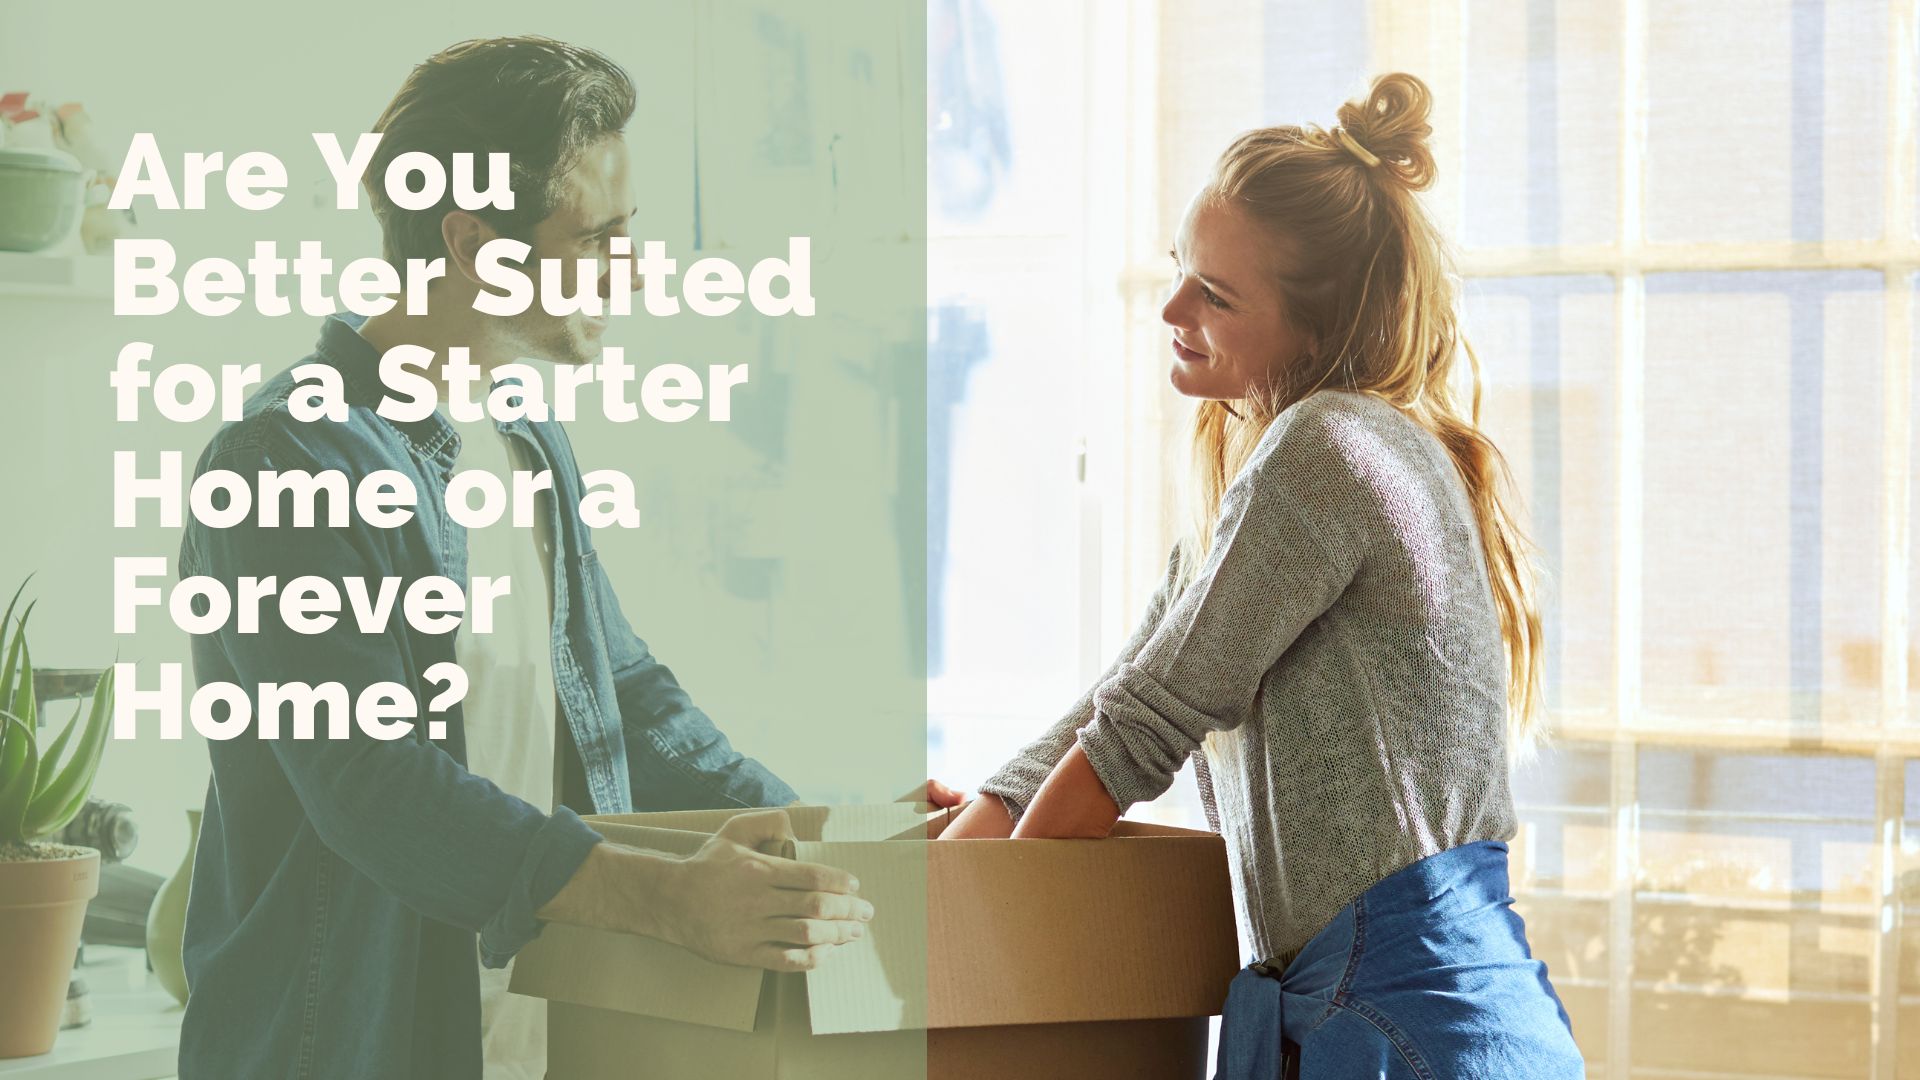 Are You Better Suited for a Starter Home or a Forever Home